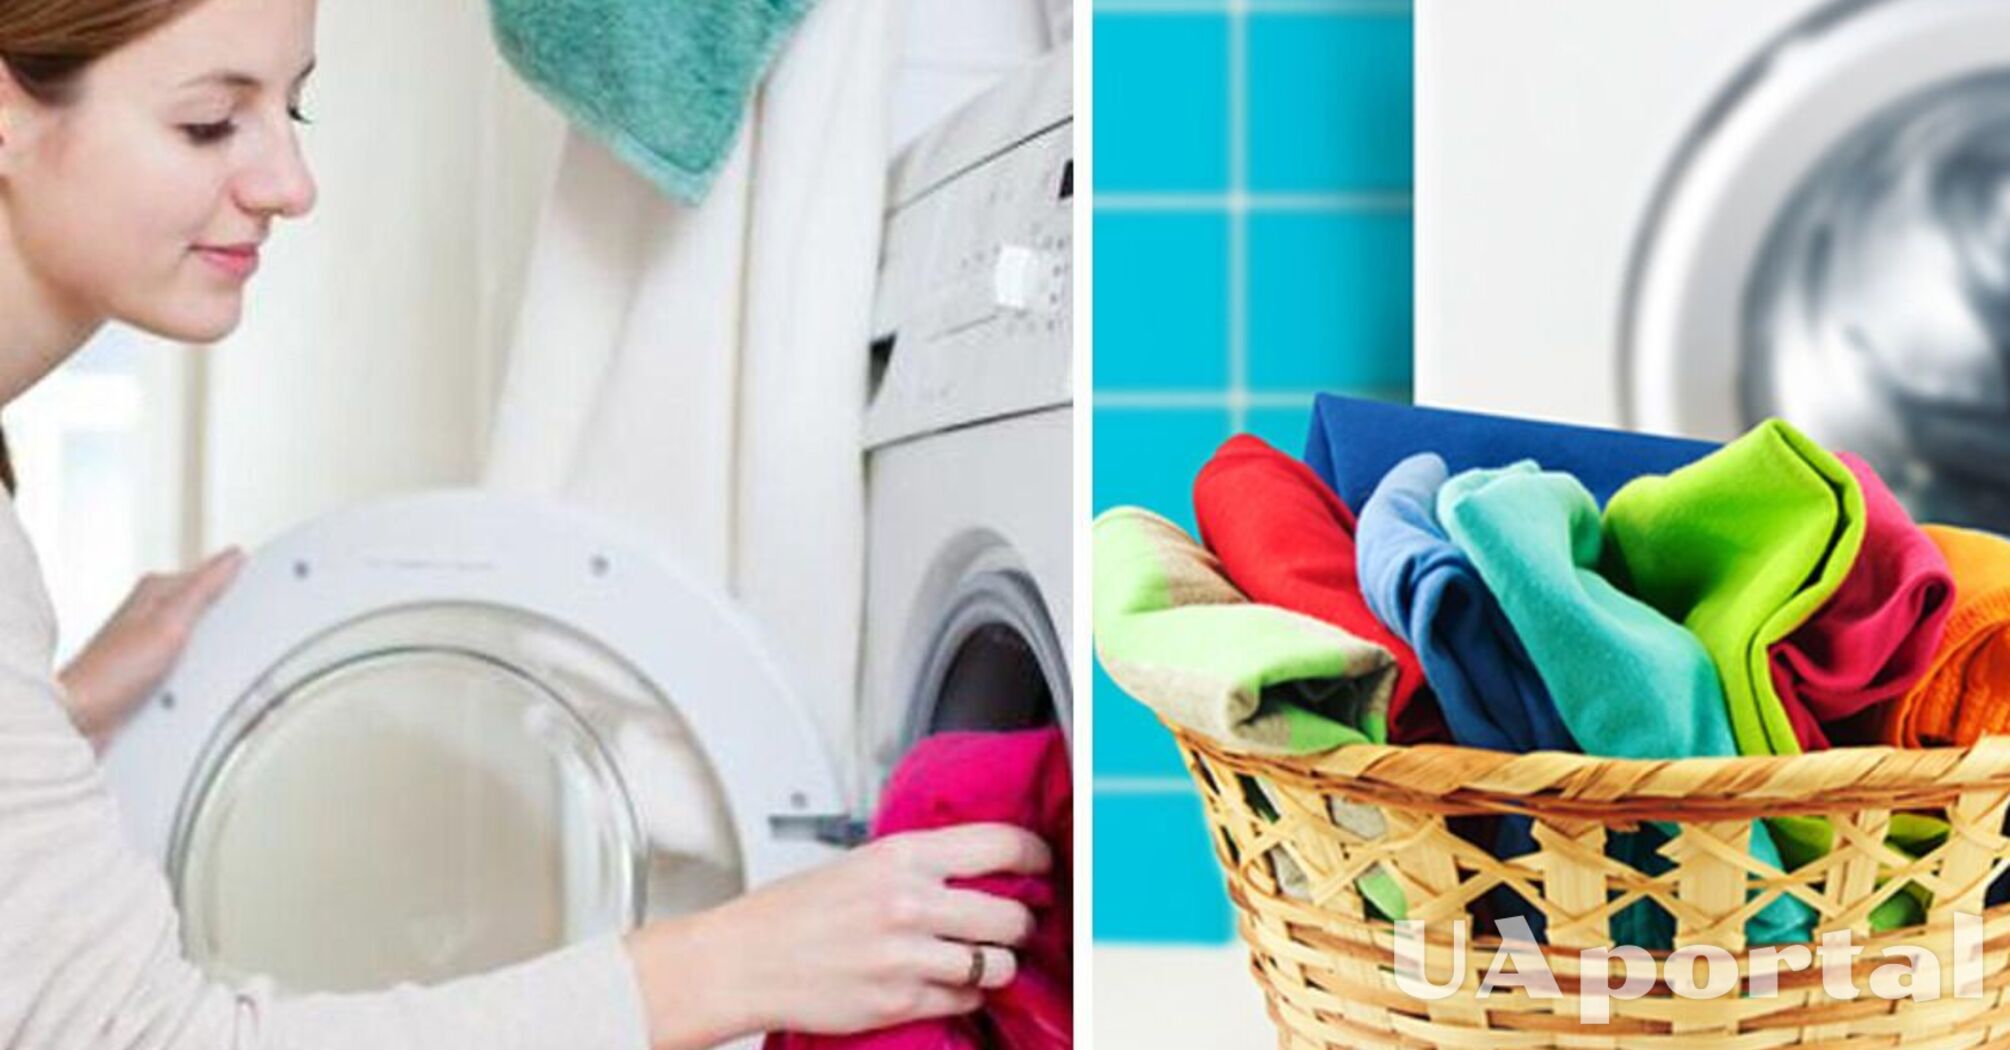 Two ways to remove old stains on clothes